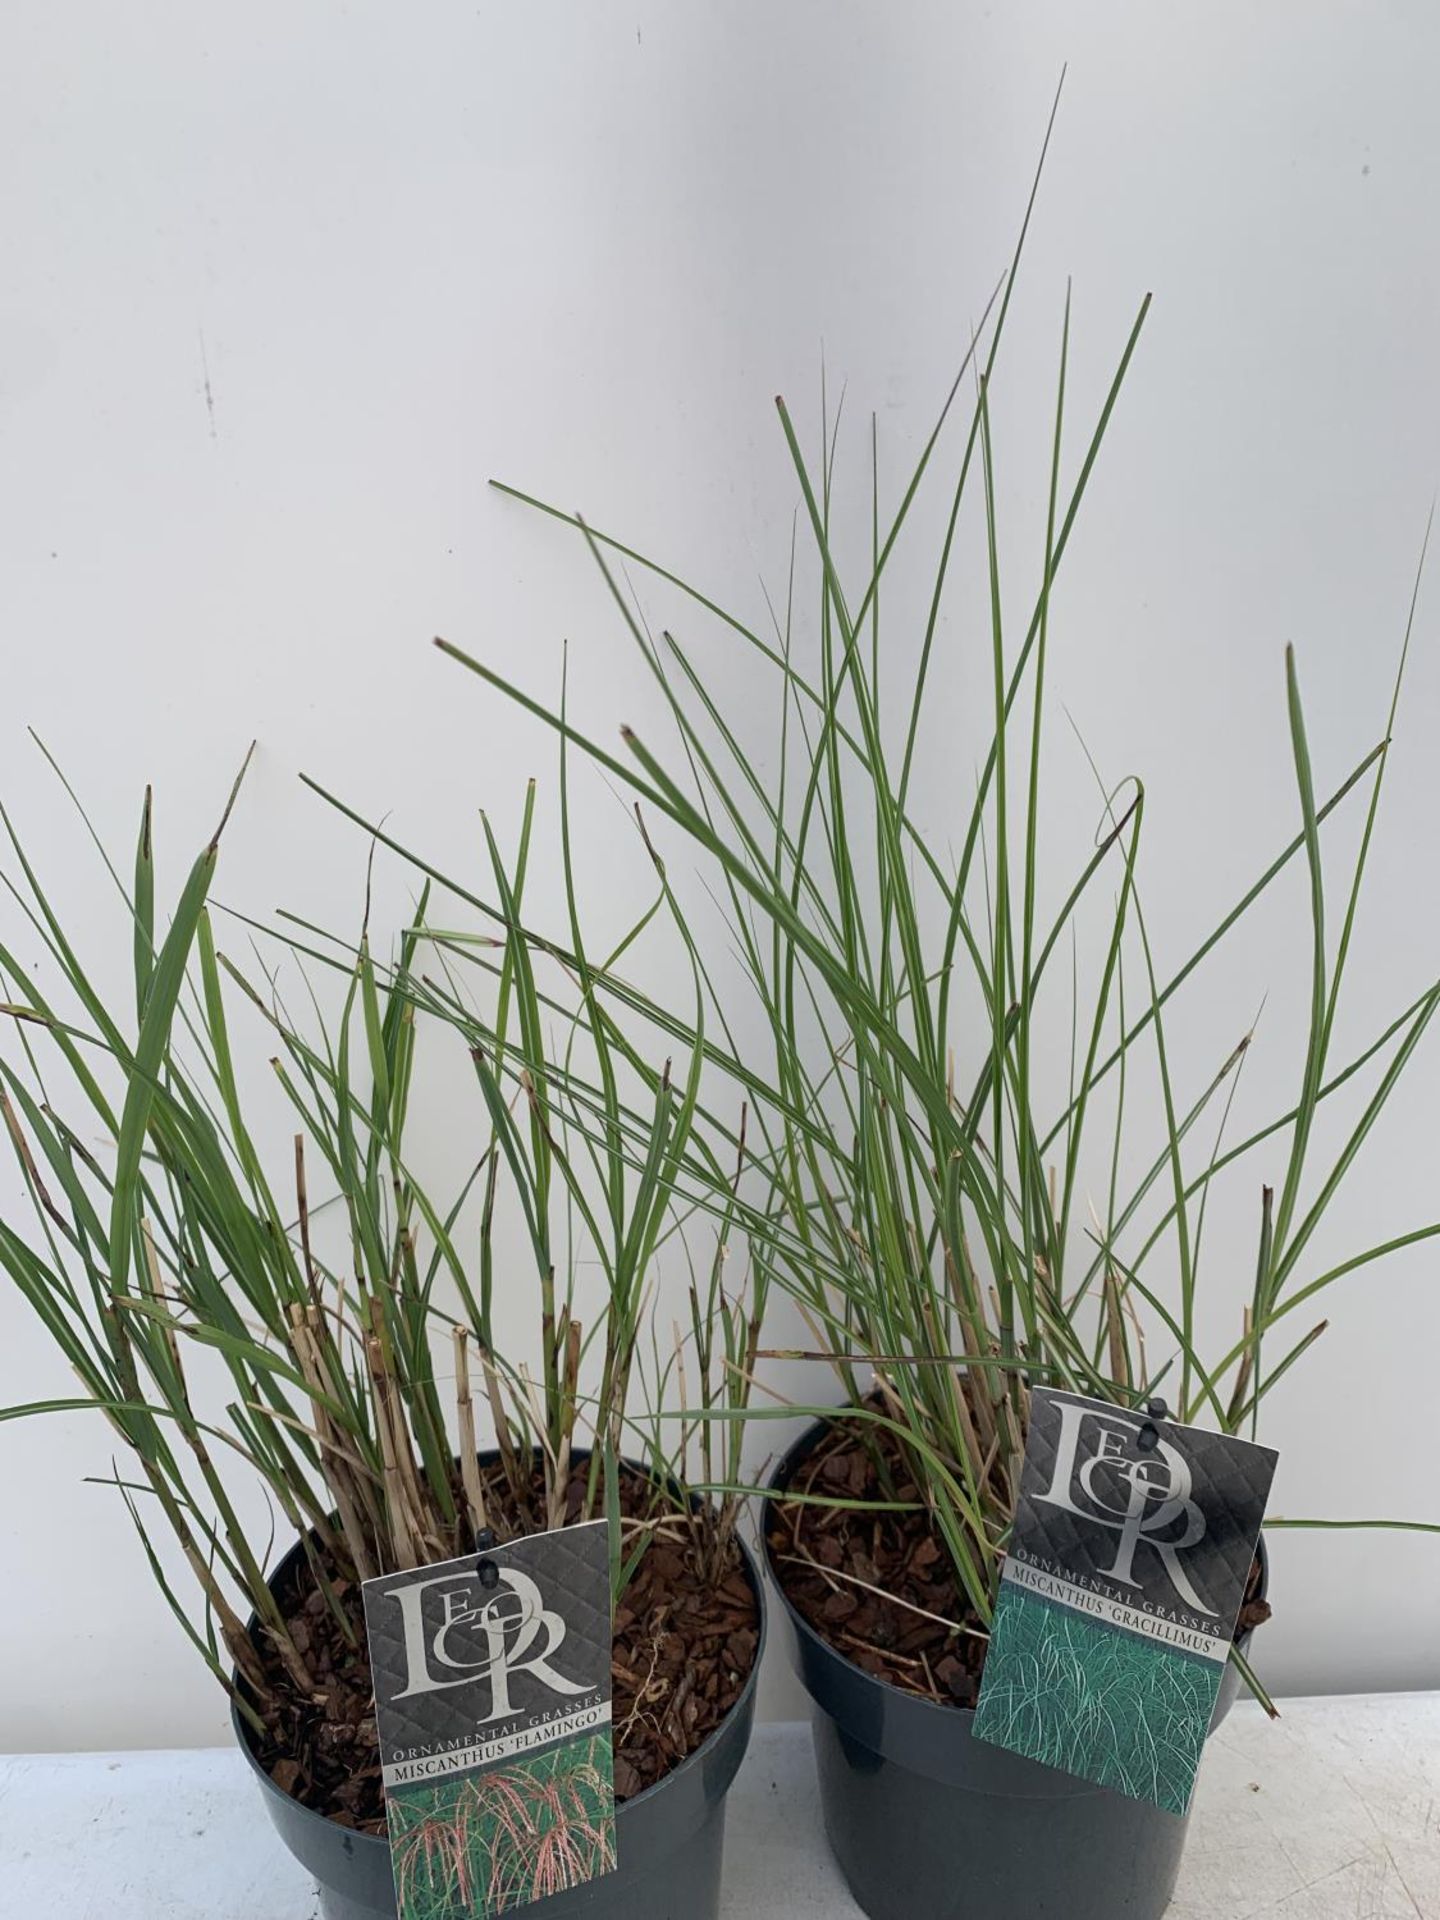 TWO ORNAMENTAL GRASSES 'MISCANTHUS FLAMINGO' AND 'MISCANTHUS GRACILLIMUS' IN 10 LTR POTS APPROX 60CM - Image 3 of 6